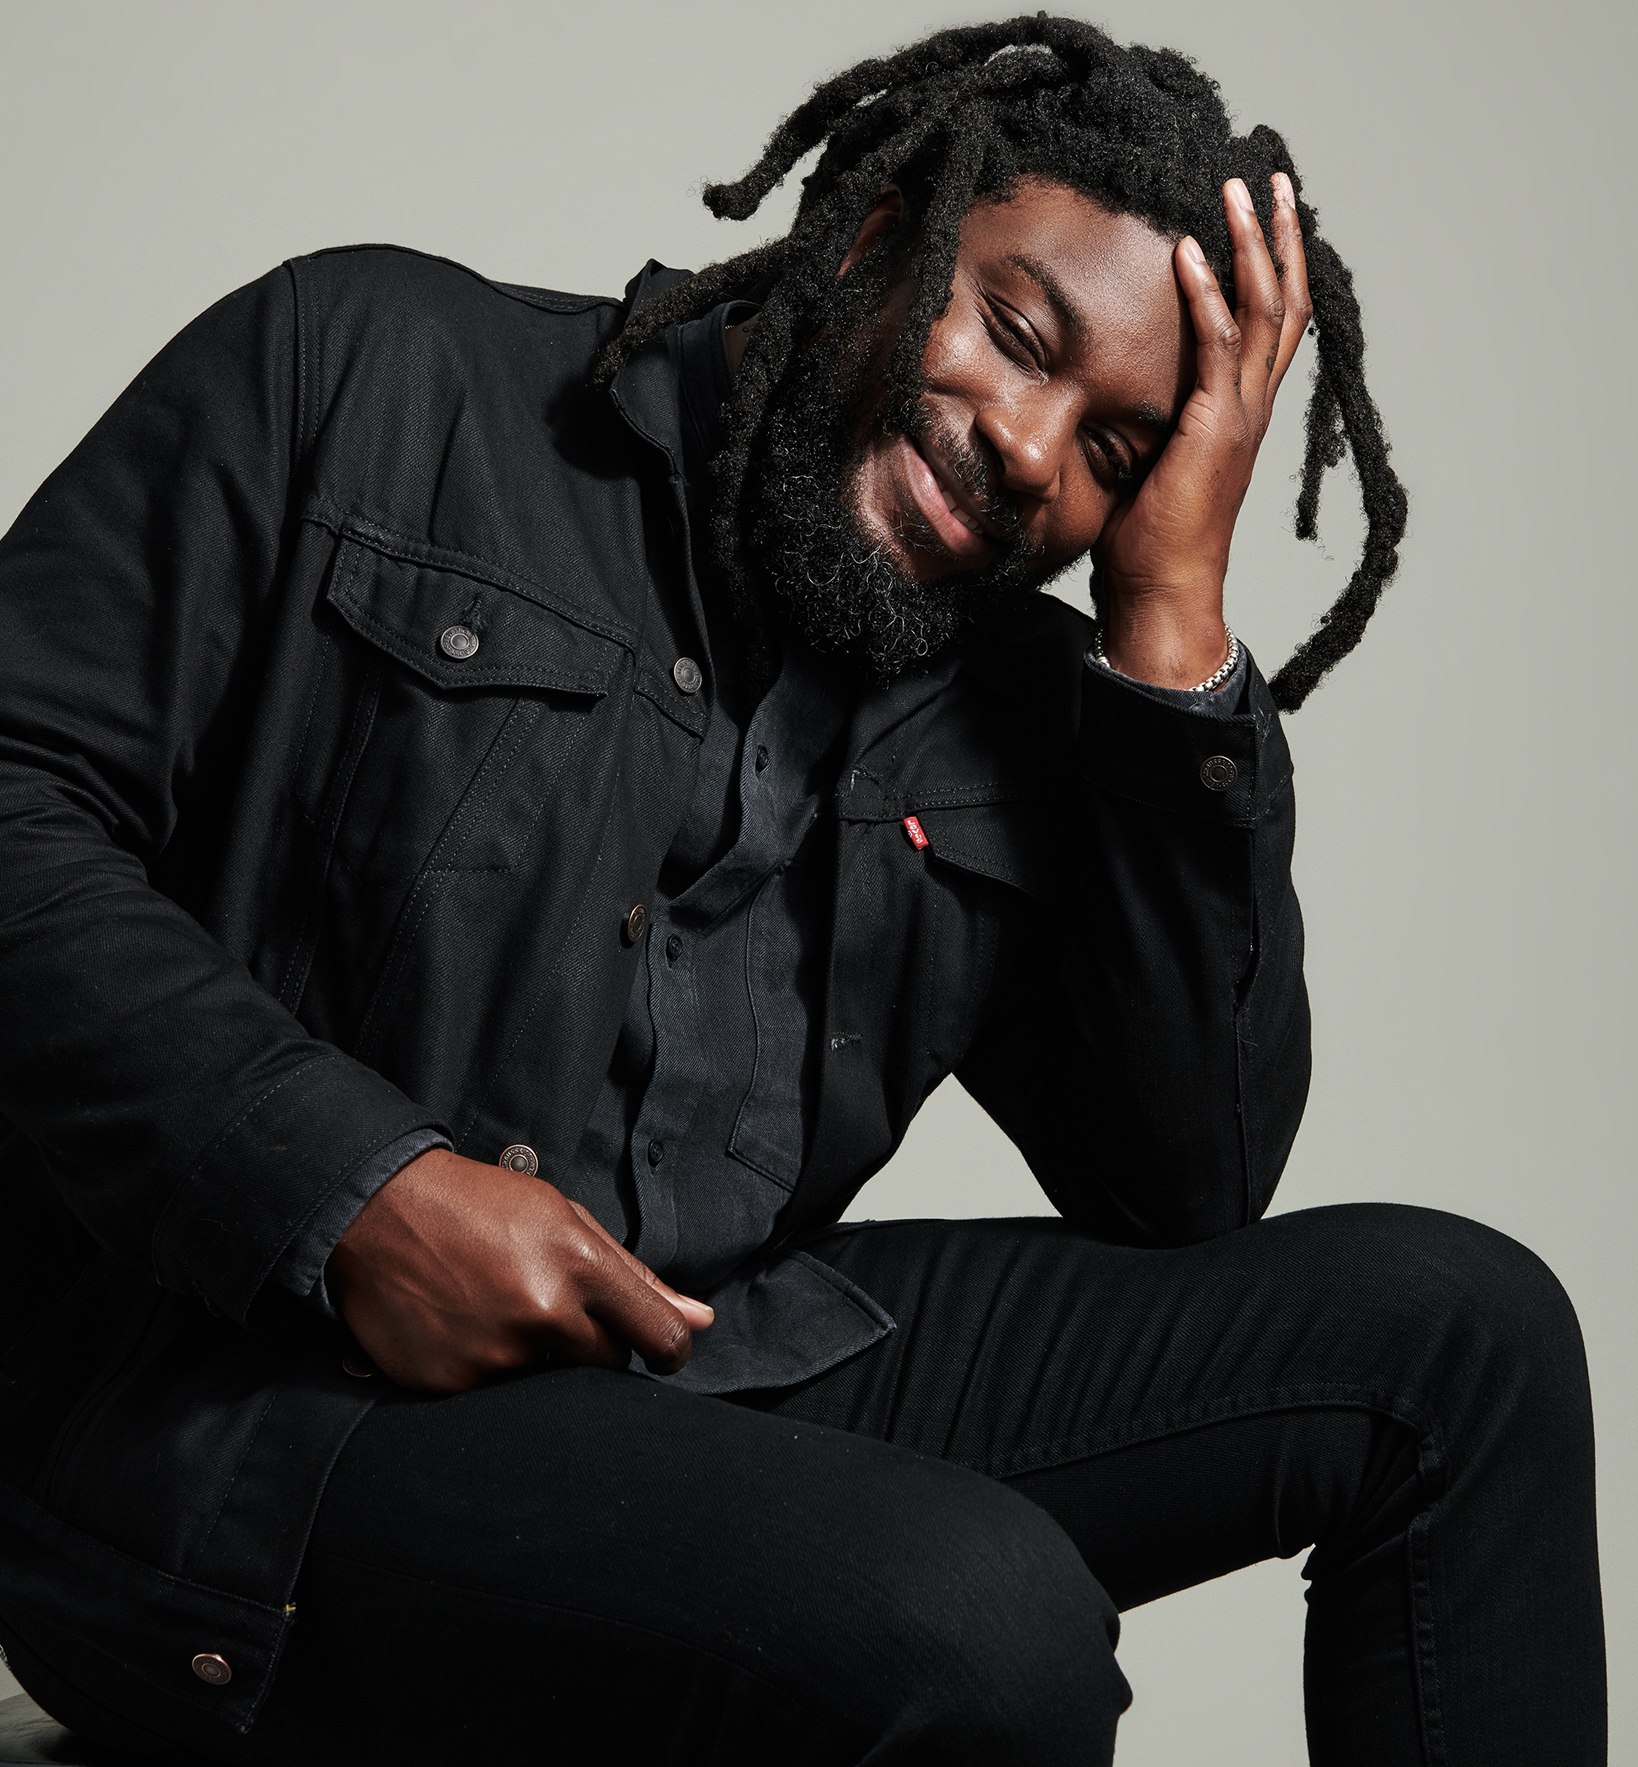 Art Talk with Jason Reynolds  National Endowment for the Arts